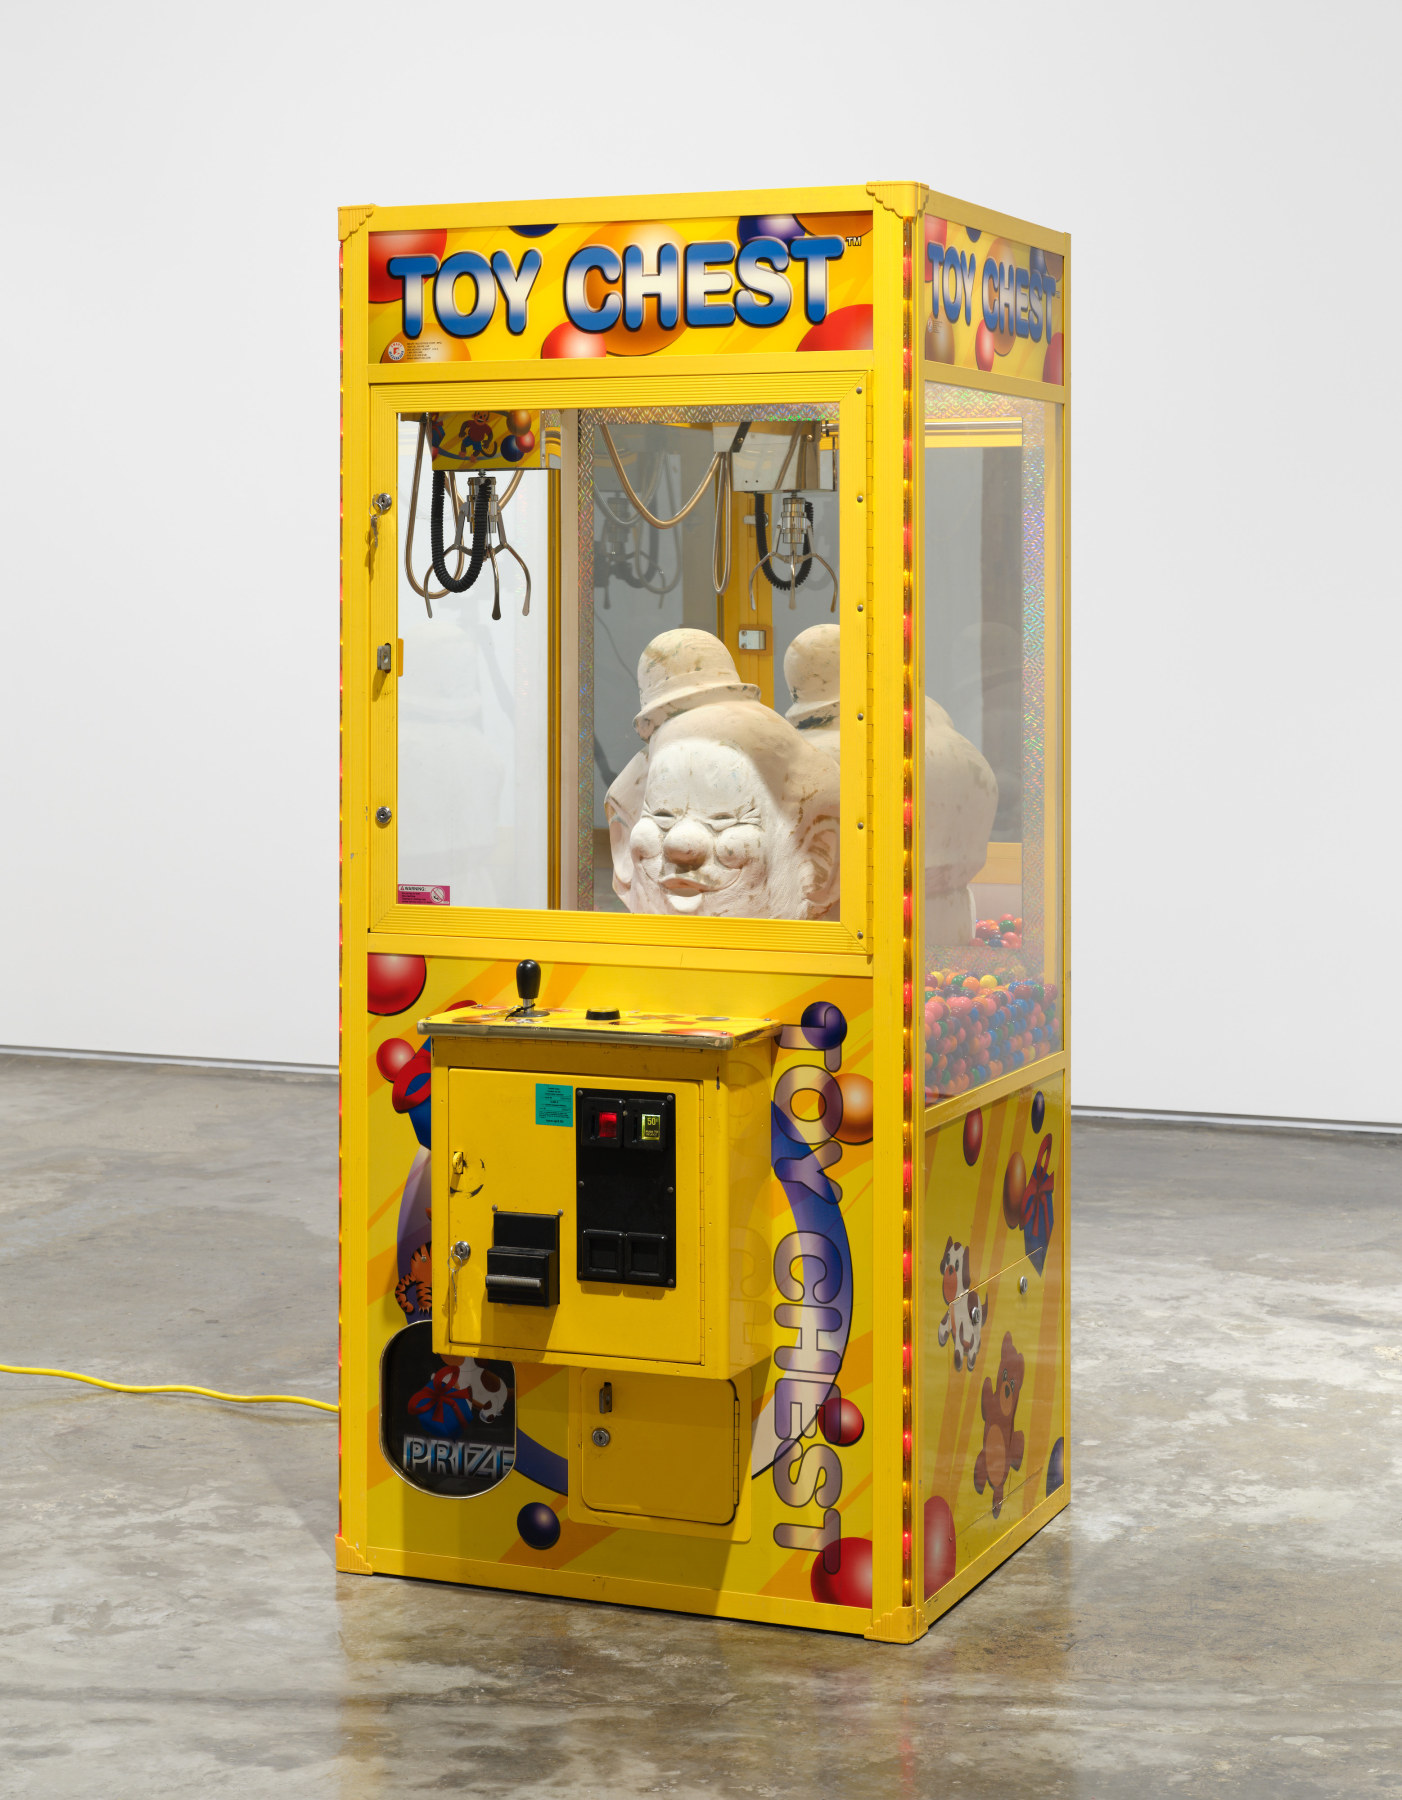 Anthony Olubunmi Akinbola's artowrk "Toy Chest". Yellow carnival game with large chalkware clown bust inside surrounded by gum balls. 70 x 31 1/2 x 33 1/4 in (177.8 x 80 x 84.4 cm), claw machine, candy, and chalkware, 2023.